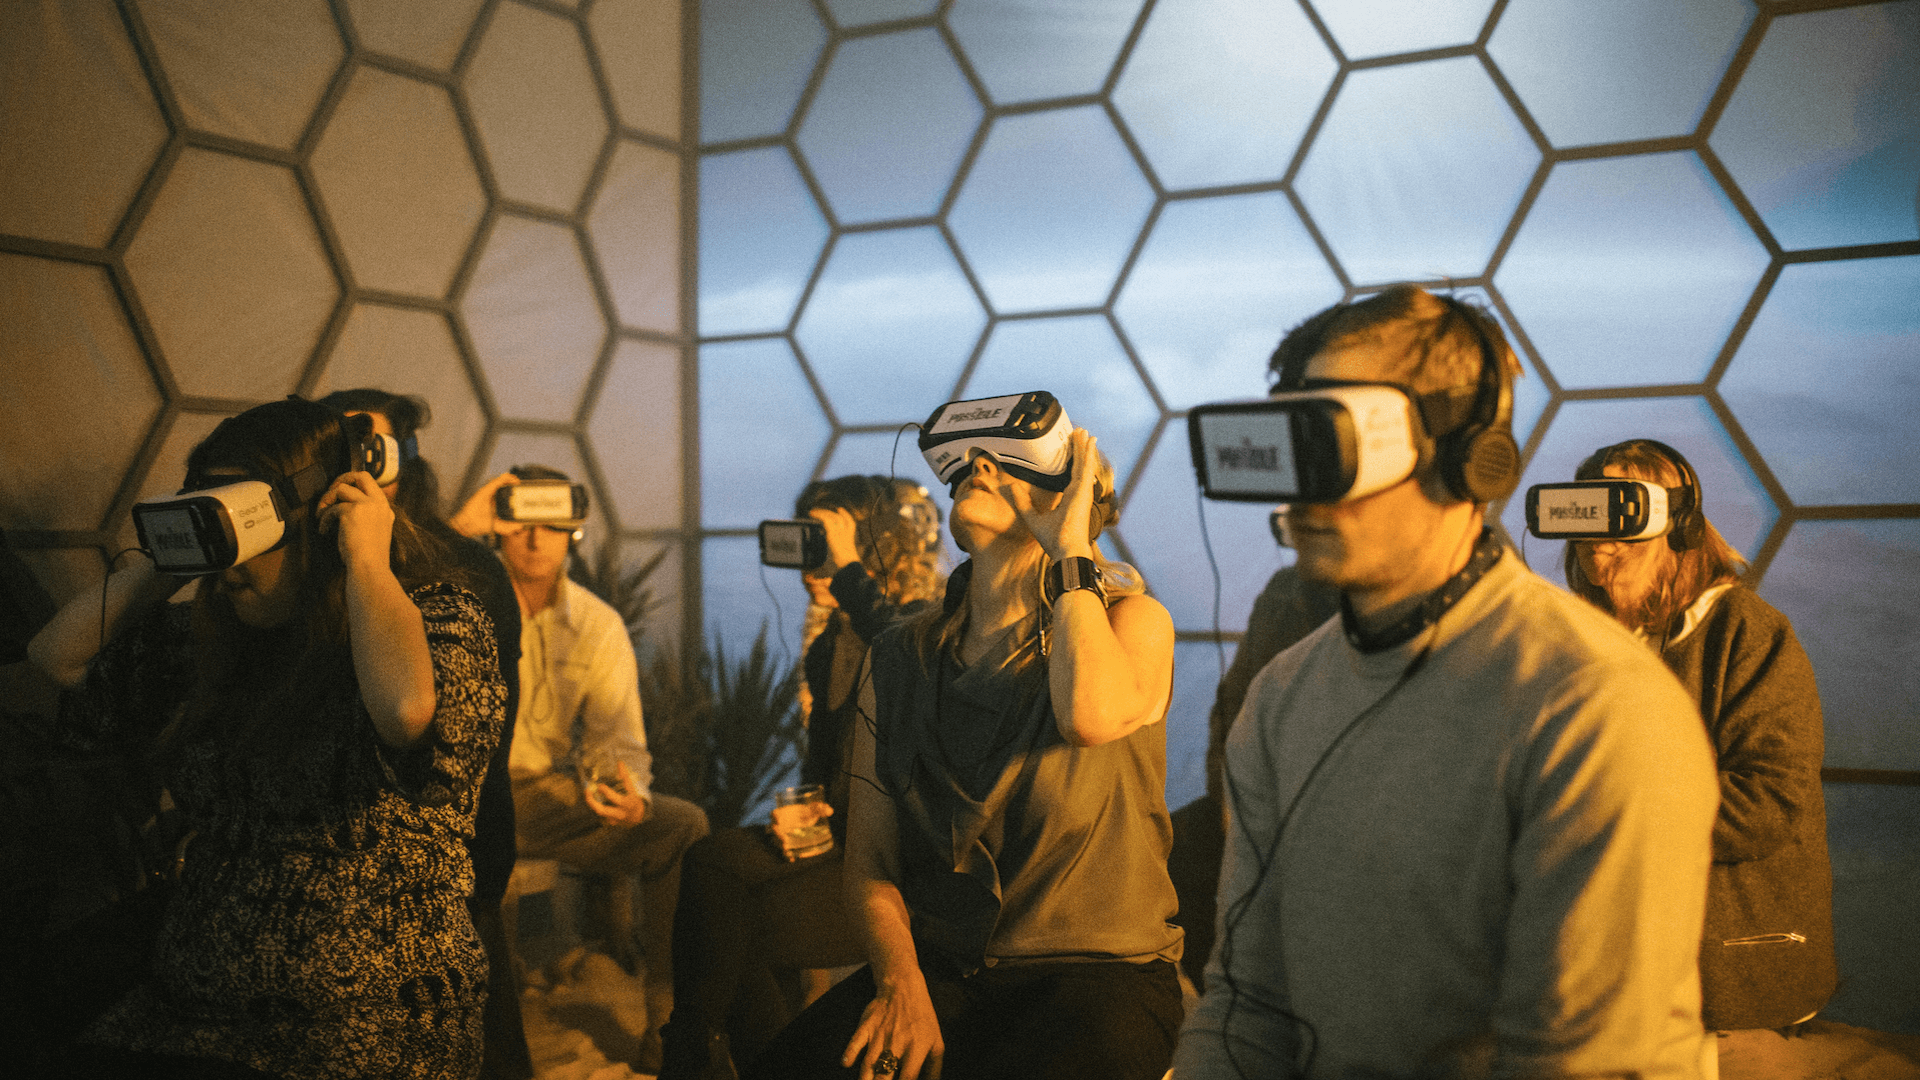 Getting essentially the most out of AR and VR experiences